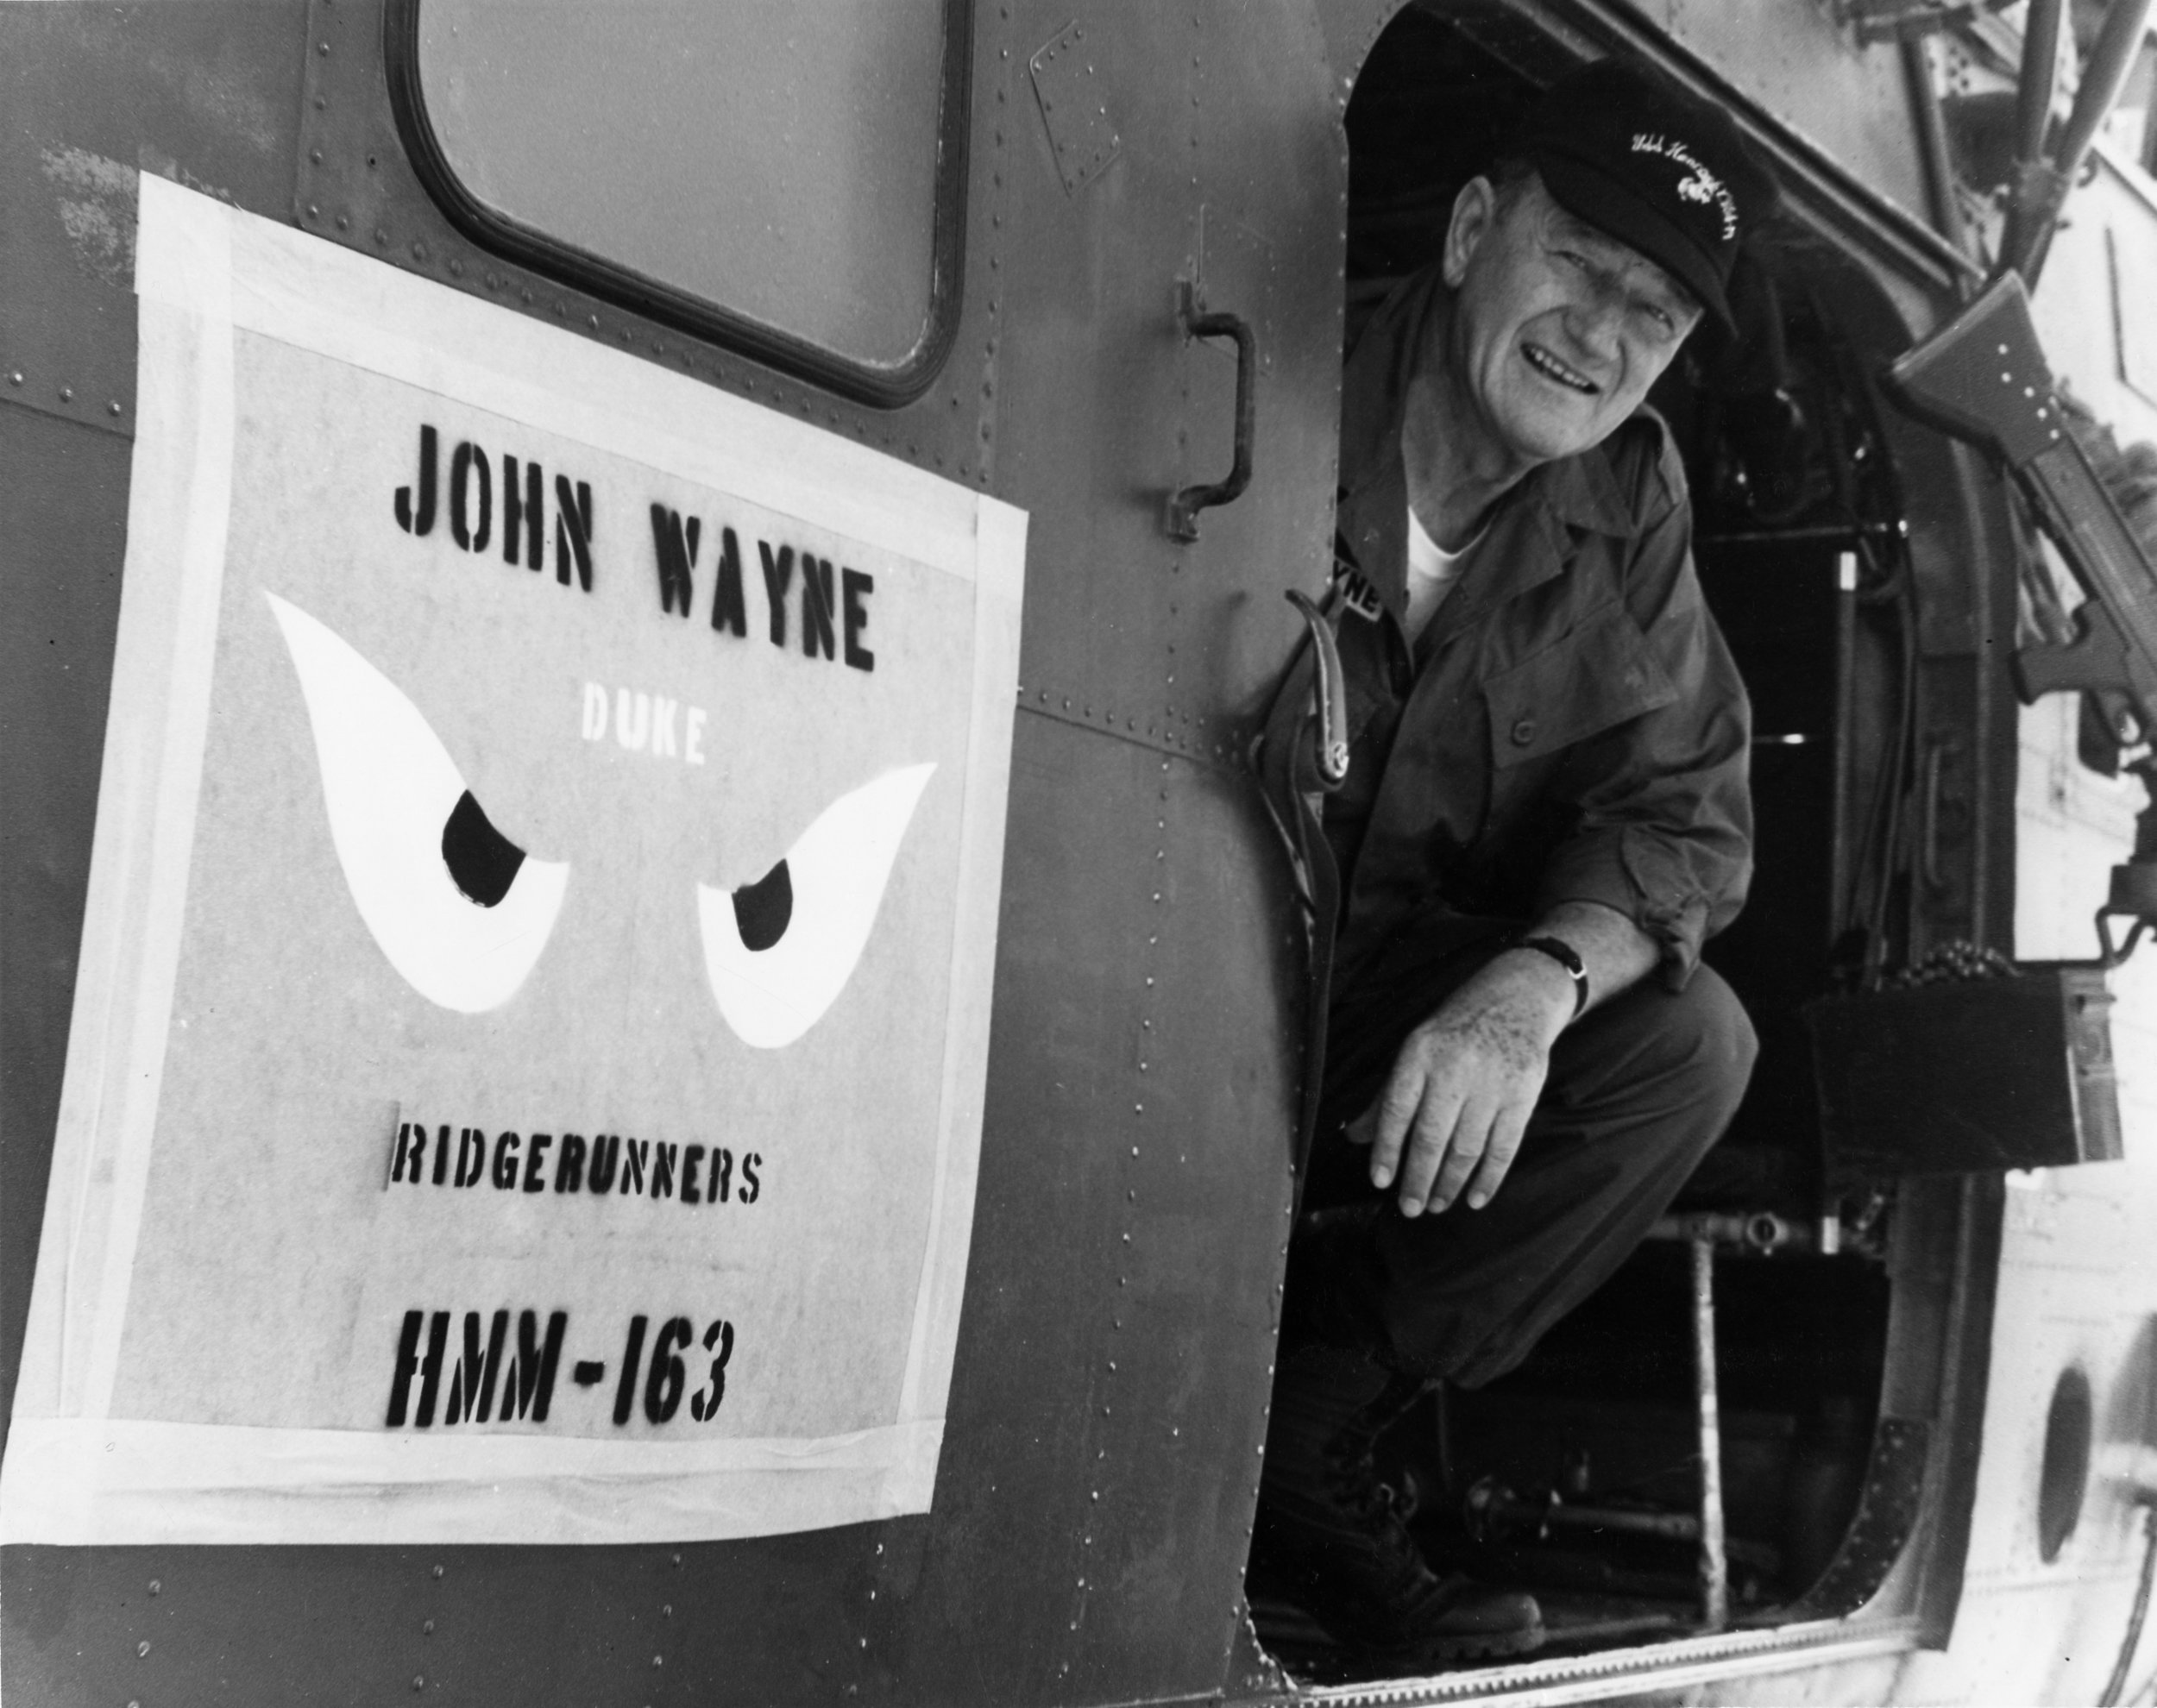 John Wayne aboard the Medium Lift Tiltrotor Squadron HMM-163 while visiting the troops in Vietnam in 1966. The aircraft was commandeered by the US Marine Corps helicopter squadron known as the “Ridge Runner’s”. The HMM-163 featured painted "Genie Ey…